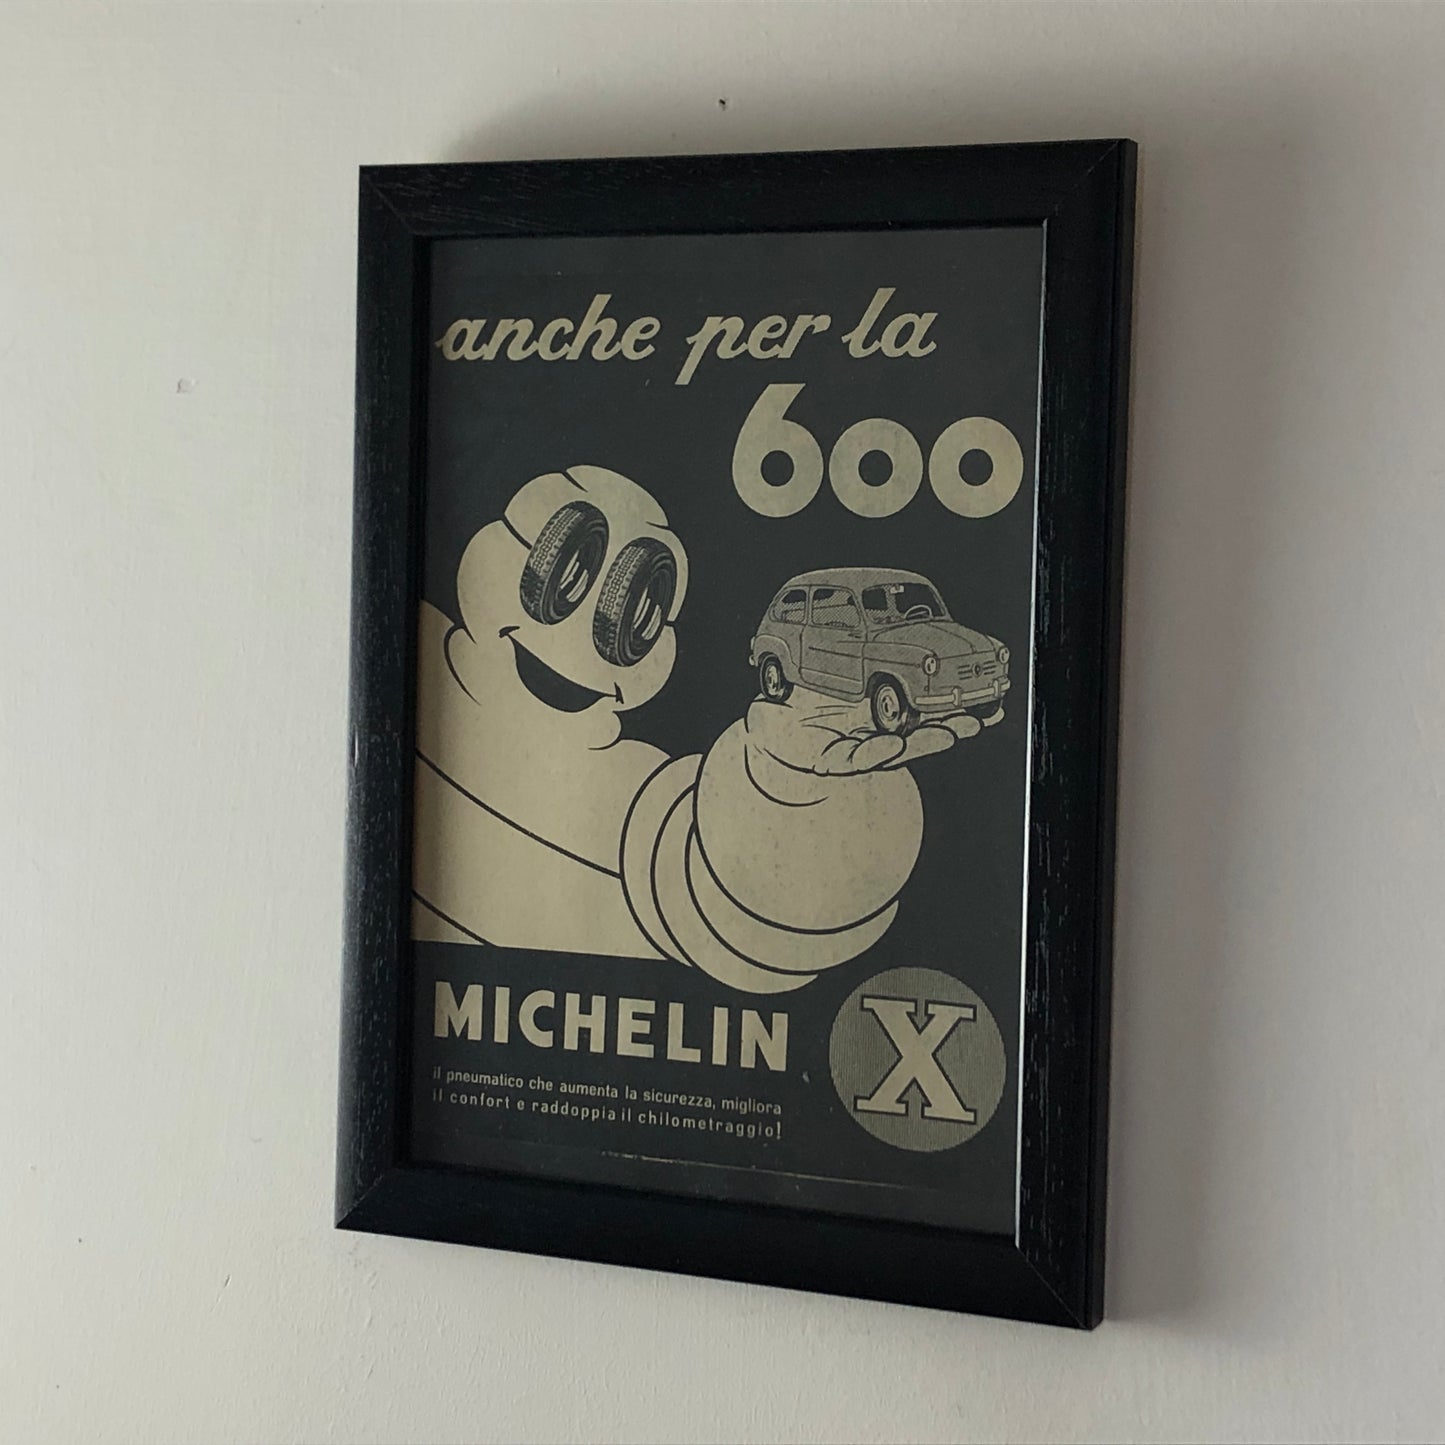 Michelin, 1960 Advertising Michelin X Tires for Fiat 600 with Italian Caption